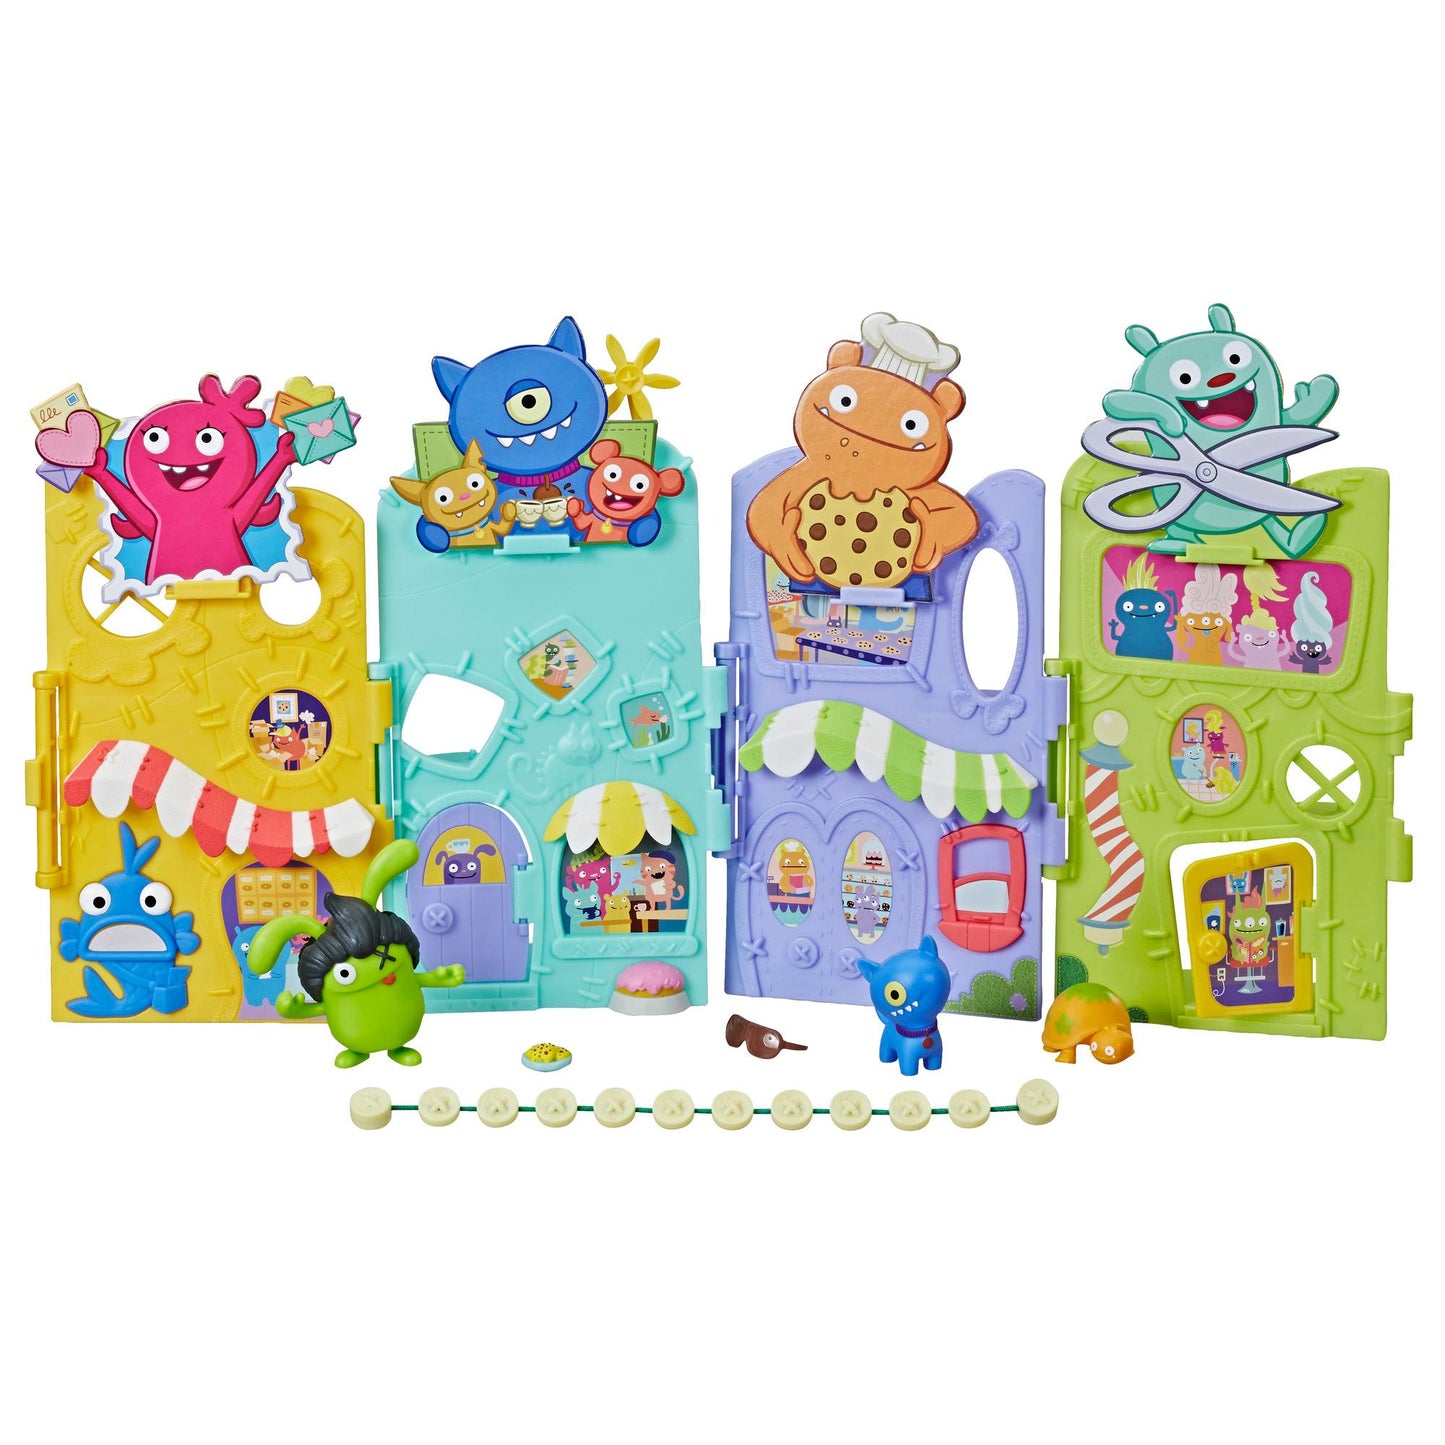 UglyDolls Uglyville Unfolded Main Street Playset and Portable Tote, 3